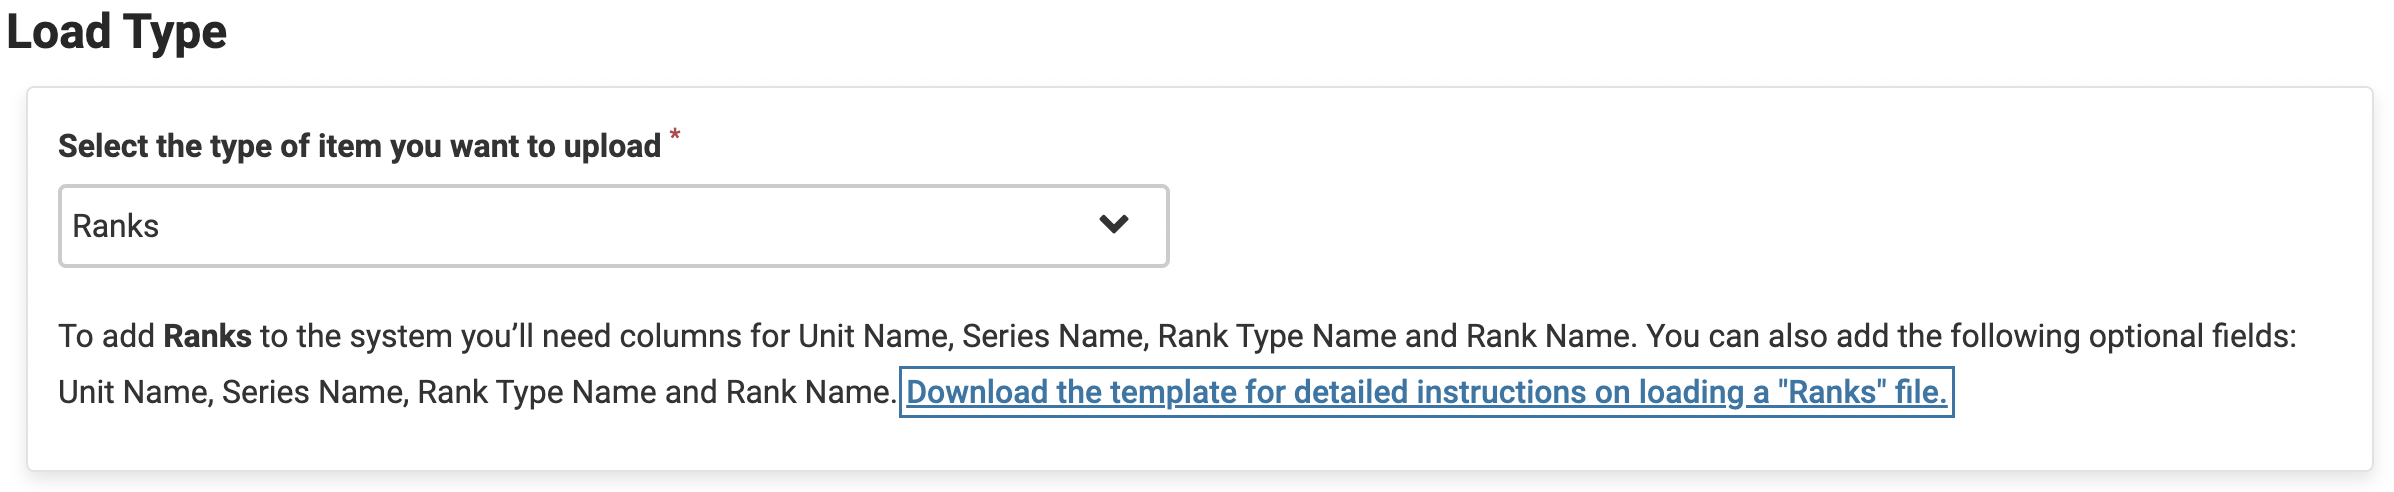 Load Type section with Ranks selected and the Download the template for detailed instructions on loading a "Ranks" file link selected